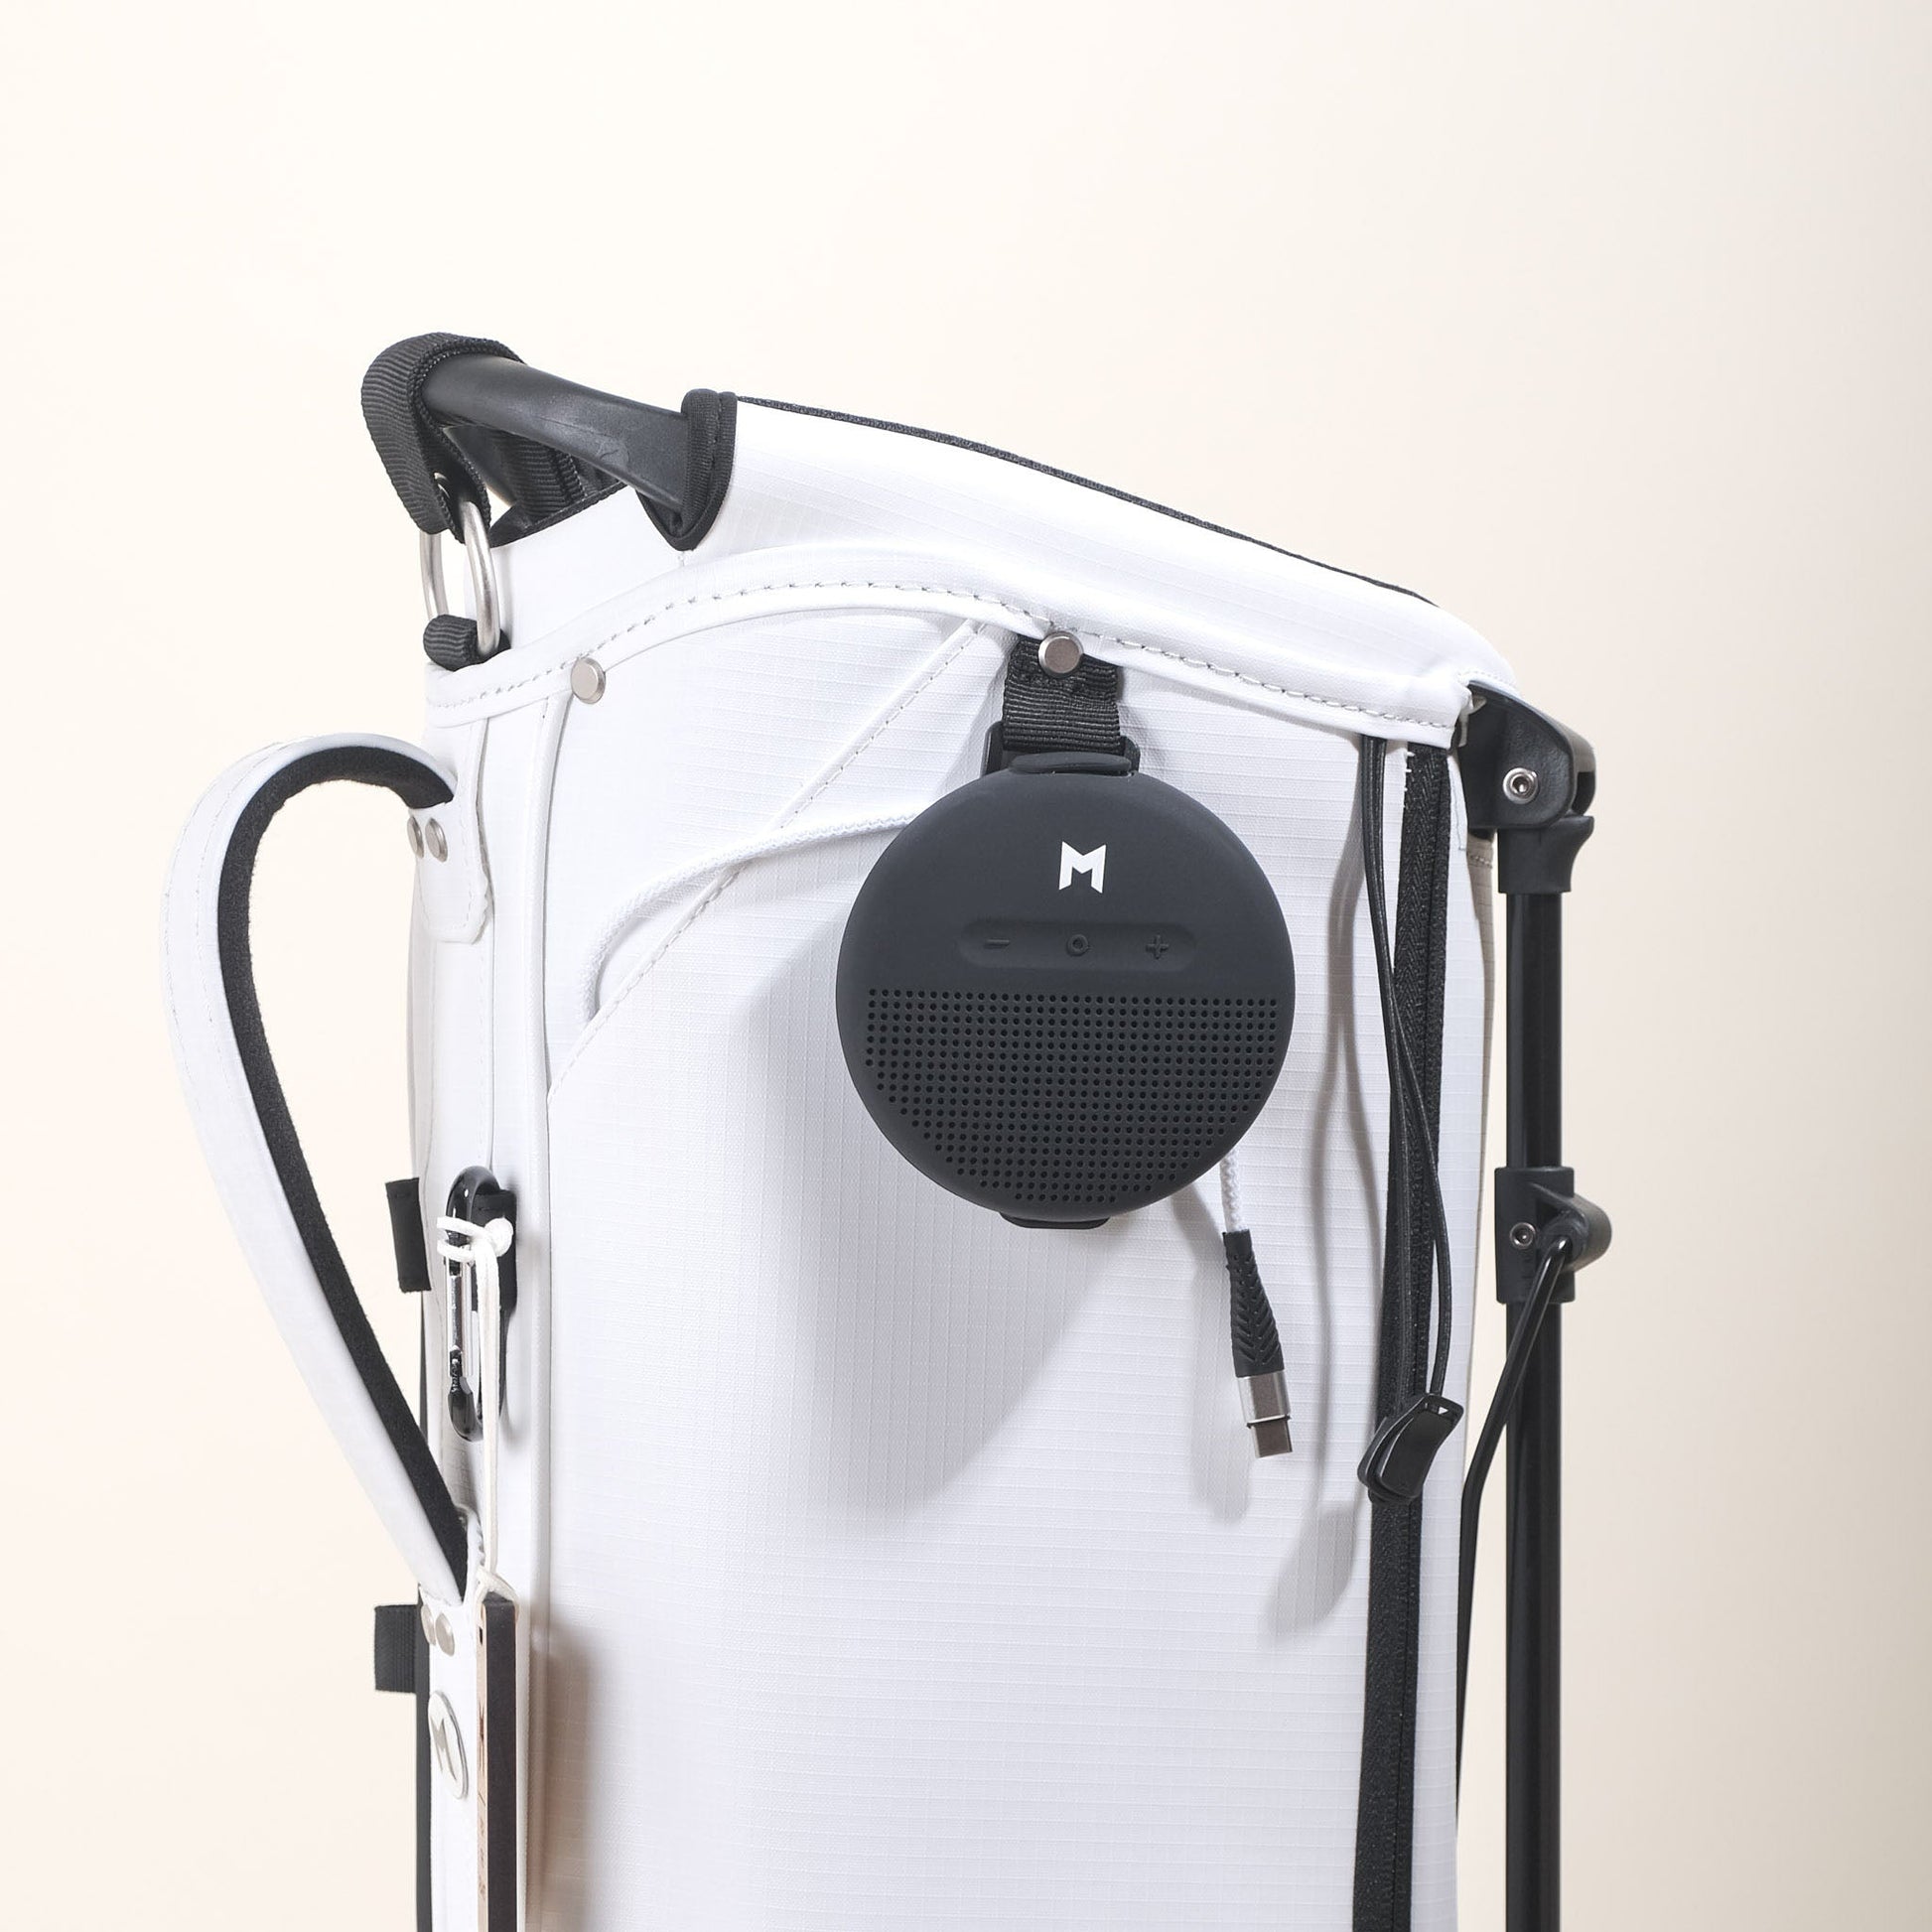 MNML GOLF's MR1 sustainable golf bag featuring waterproof bluetooth speaker with 8hr battery life to play your songs on the golf course or driving range